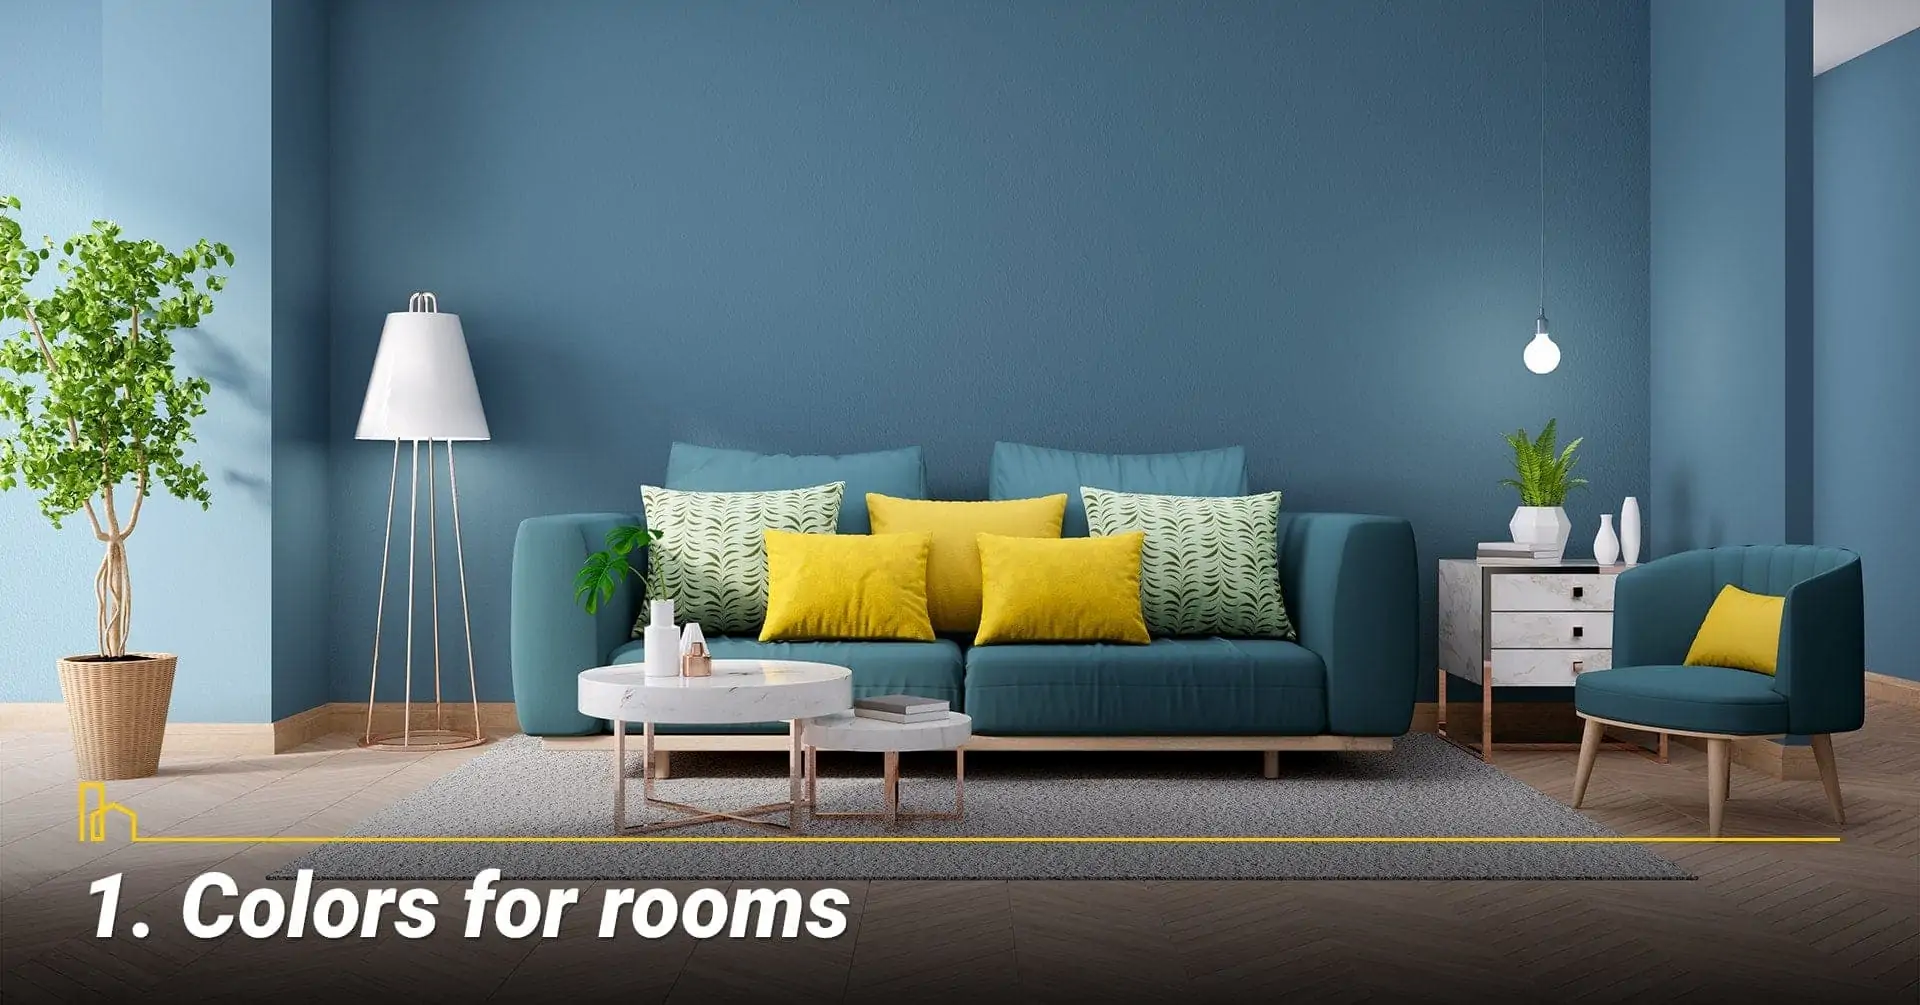 Colors for rooms, best color for your room